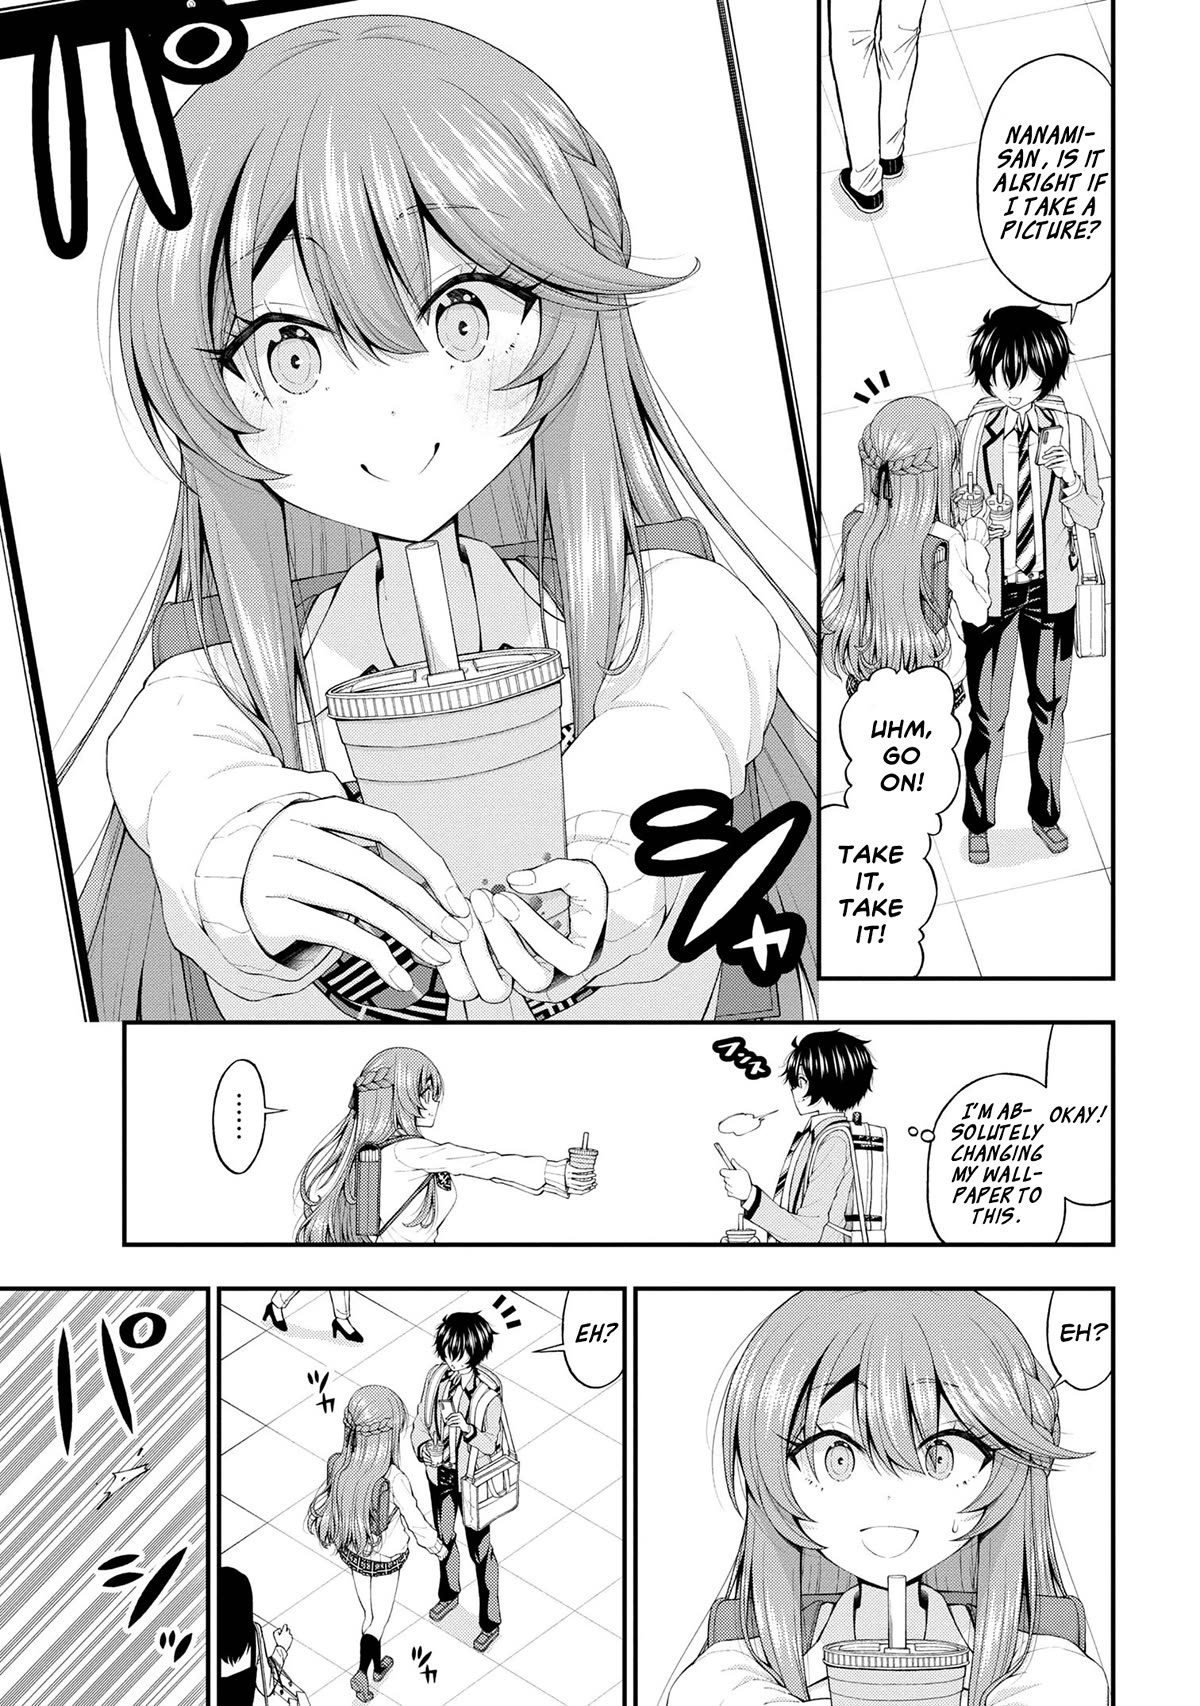 The Gal Who Was Meant to Confess to Me as a Game Punishment - chapter 14 - #5